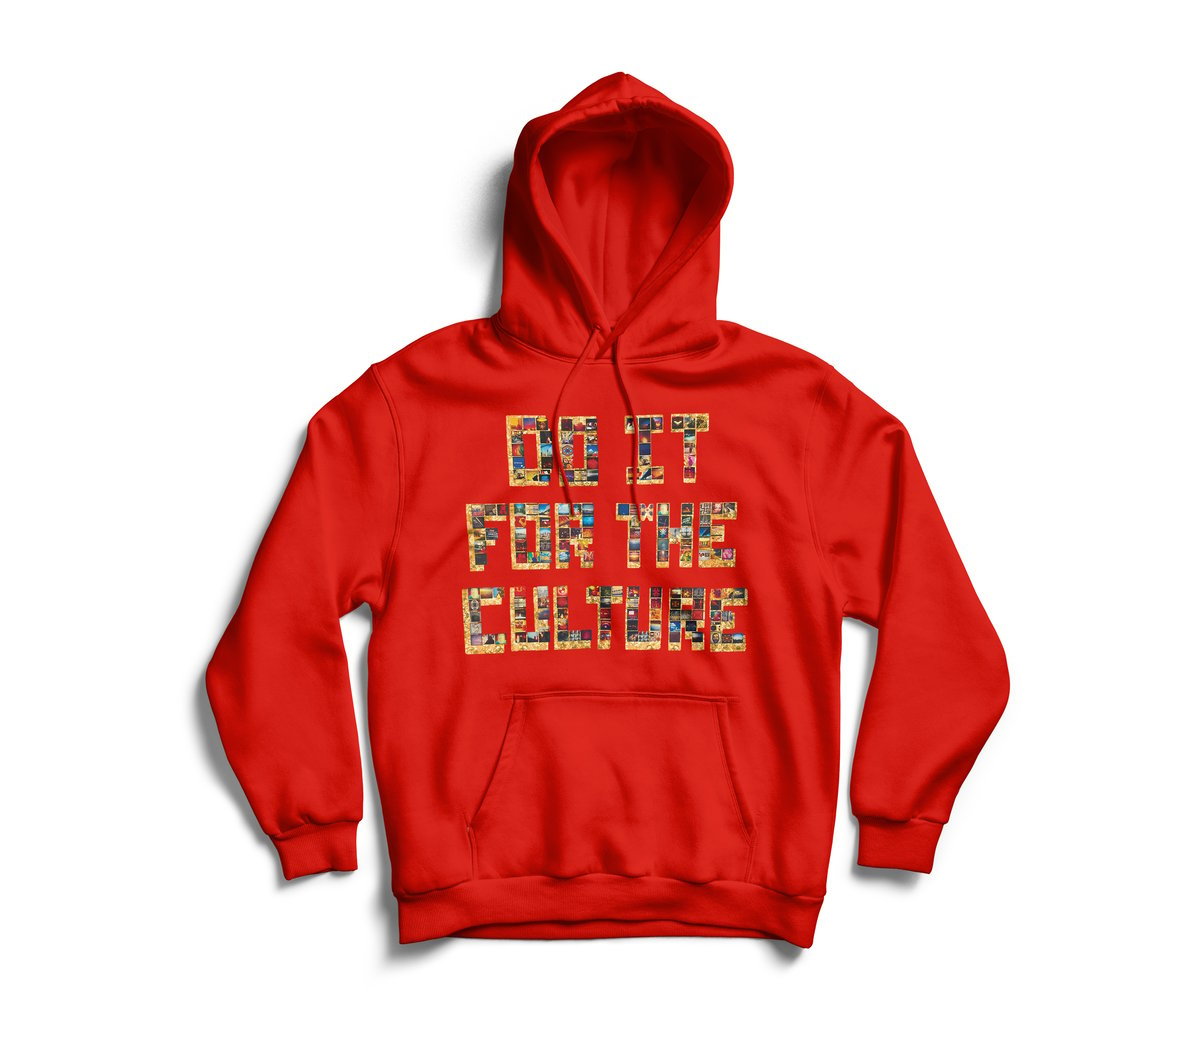 Image of Red "Championship" Hoodie